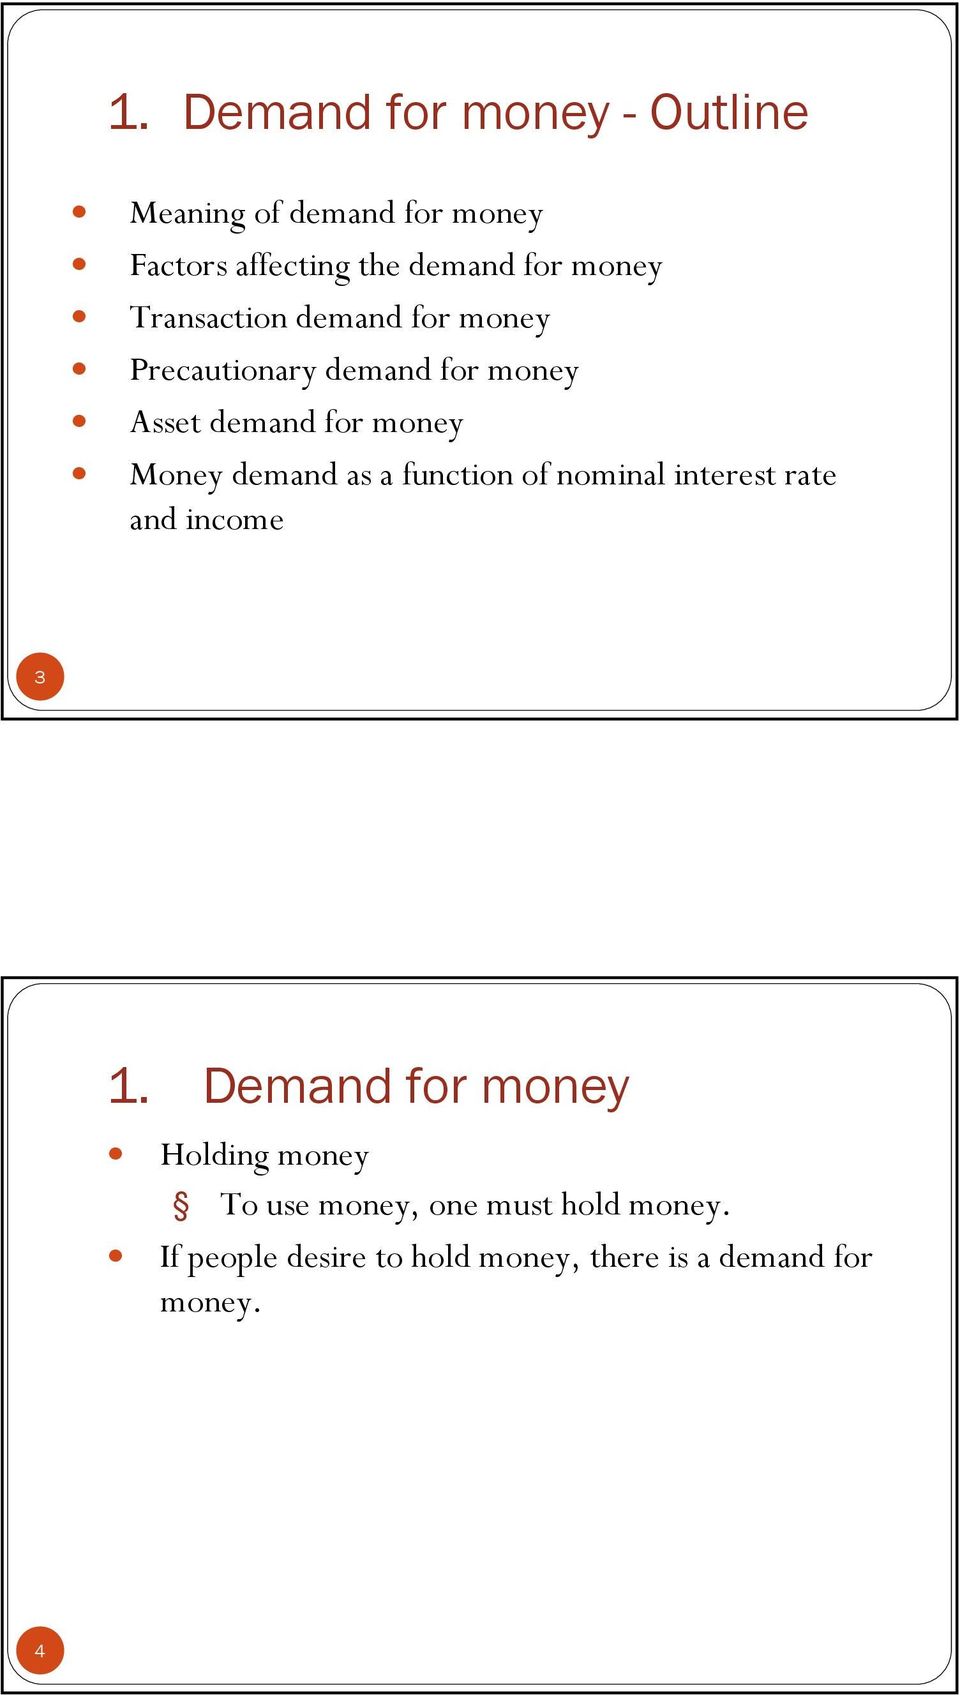 Money demand as a function of nominal interest rate and income 3 Holding money To